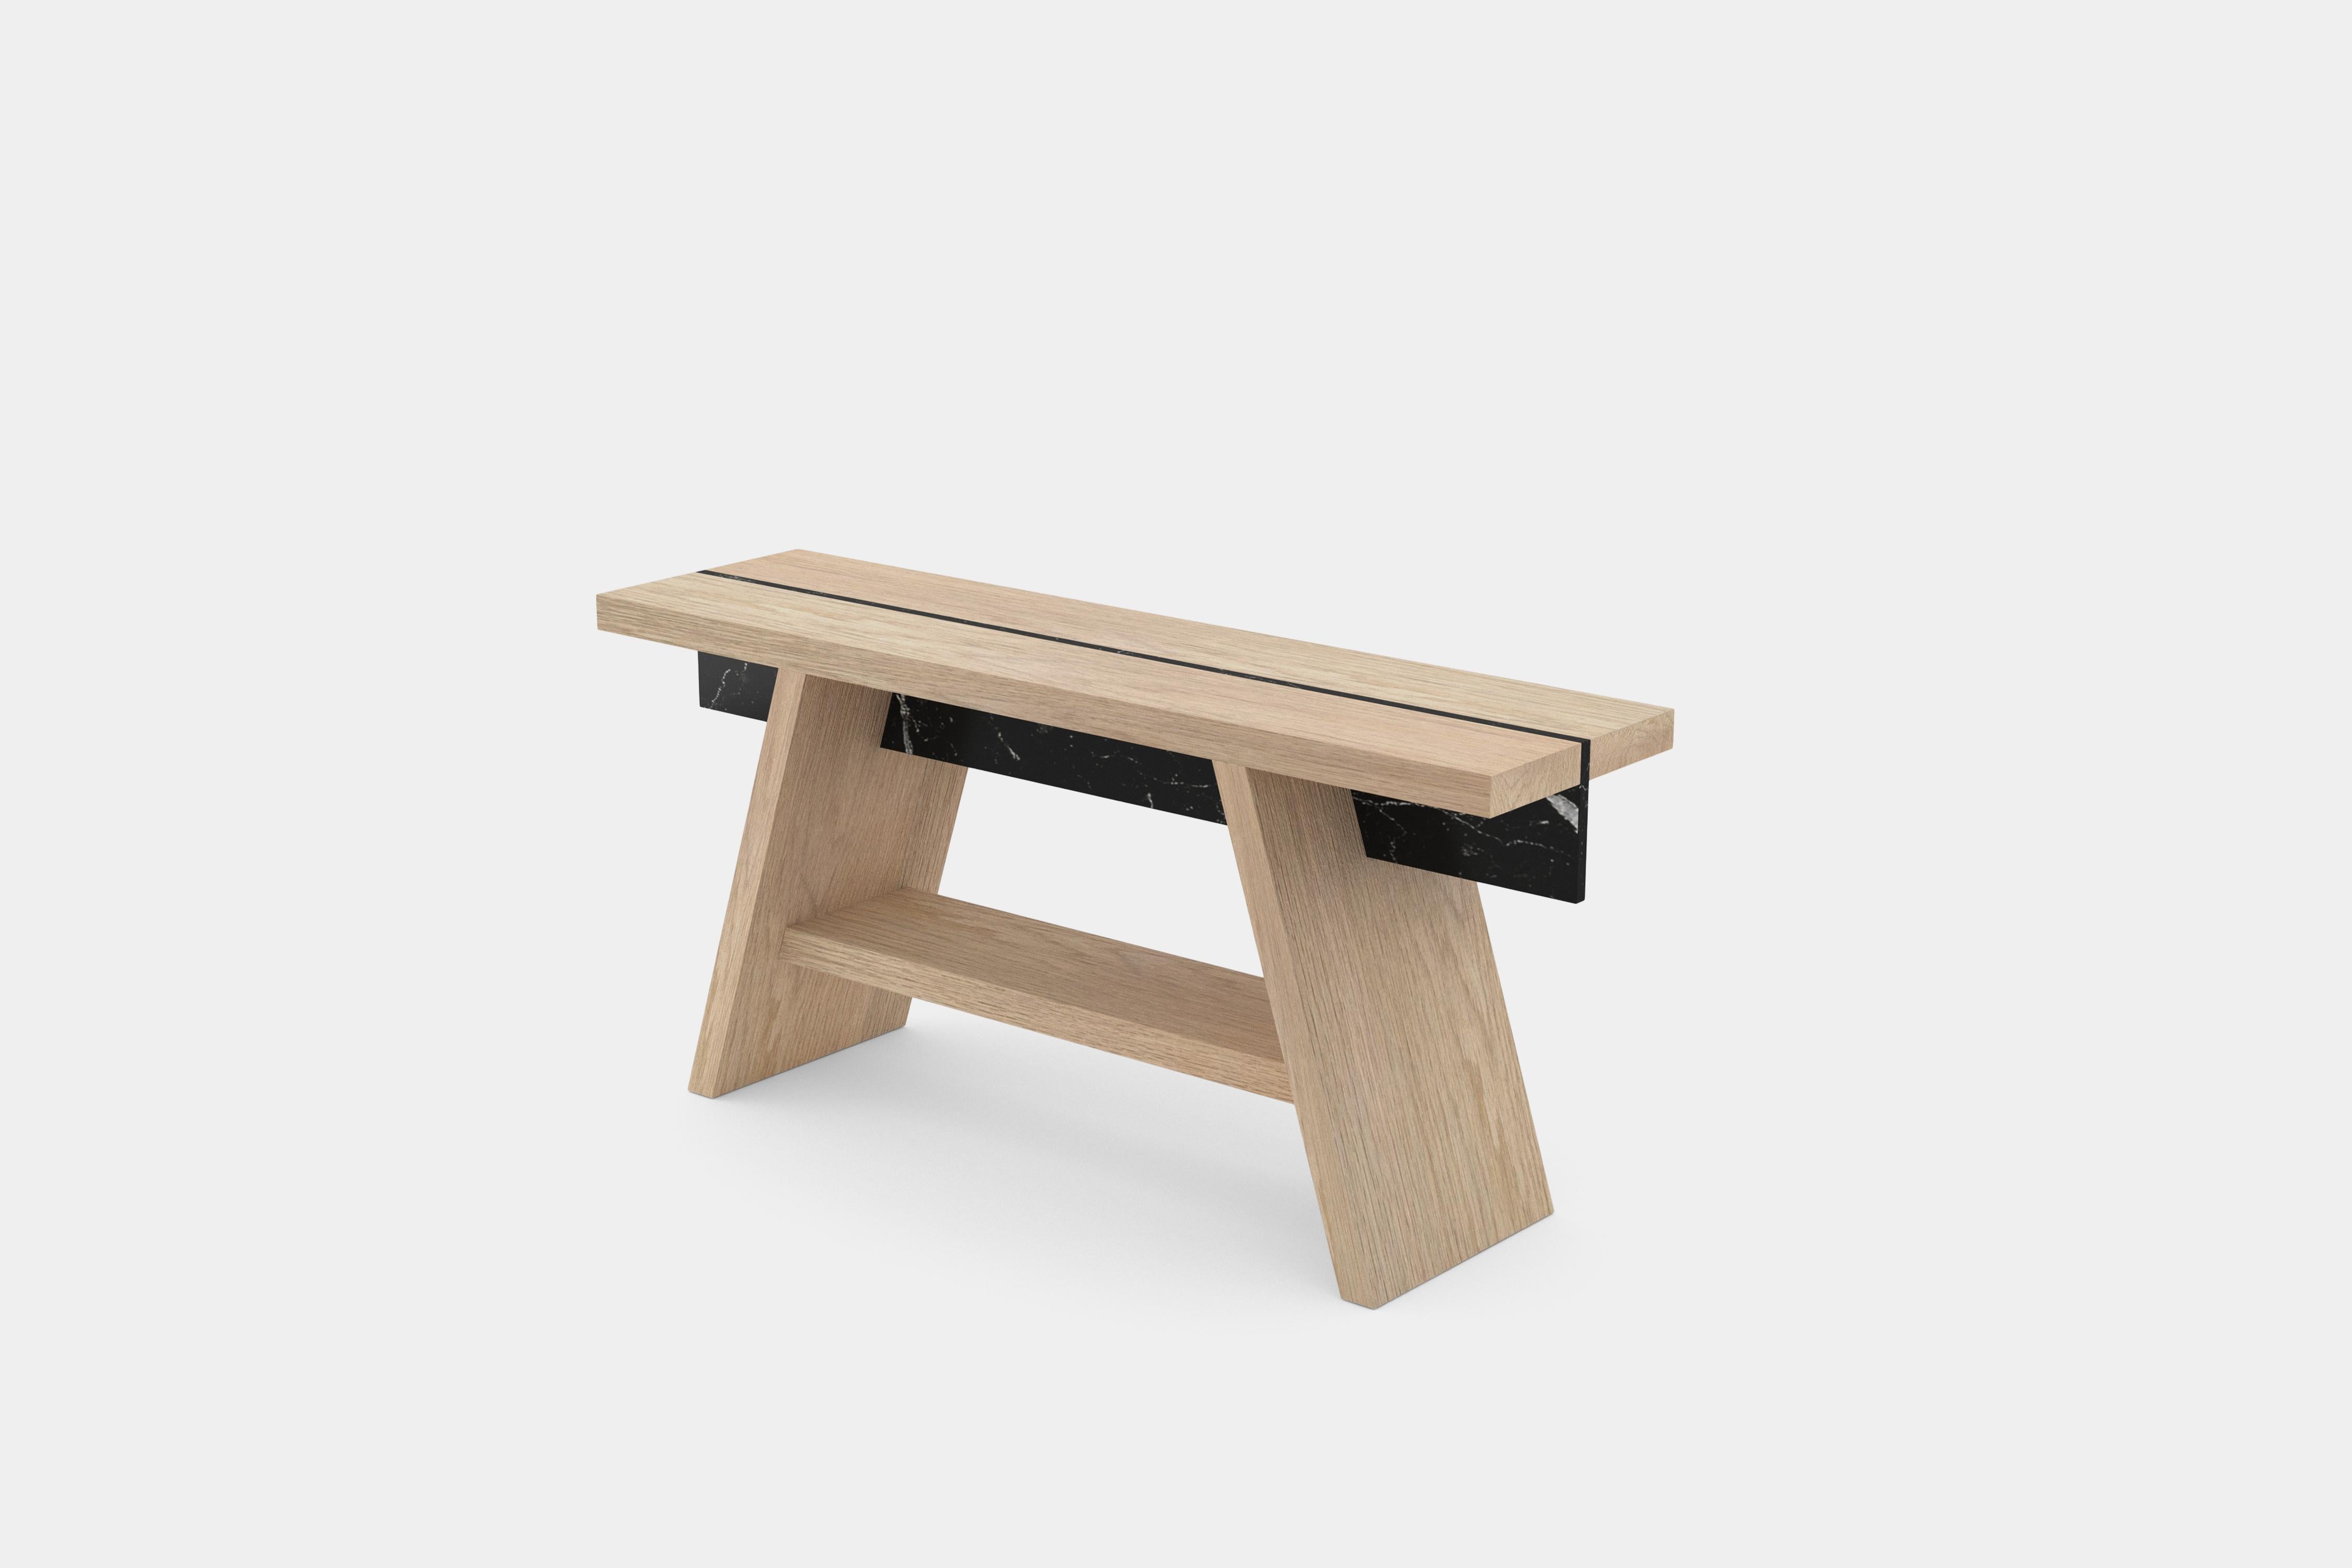 Laws of Motion Sofa Back in Solid Oak Wood, Sideboard by Joel Escalona

Laws of Motion is a furniture collection that through a series of different typologies explores concepts like force, gravity and movement. Each of these functional sculptures